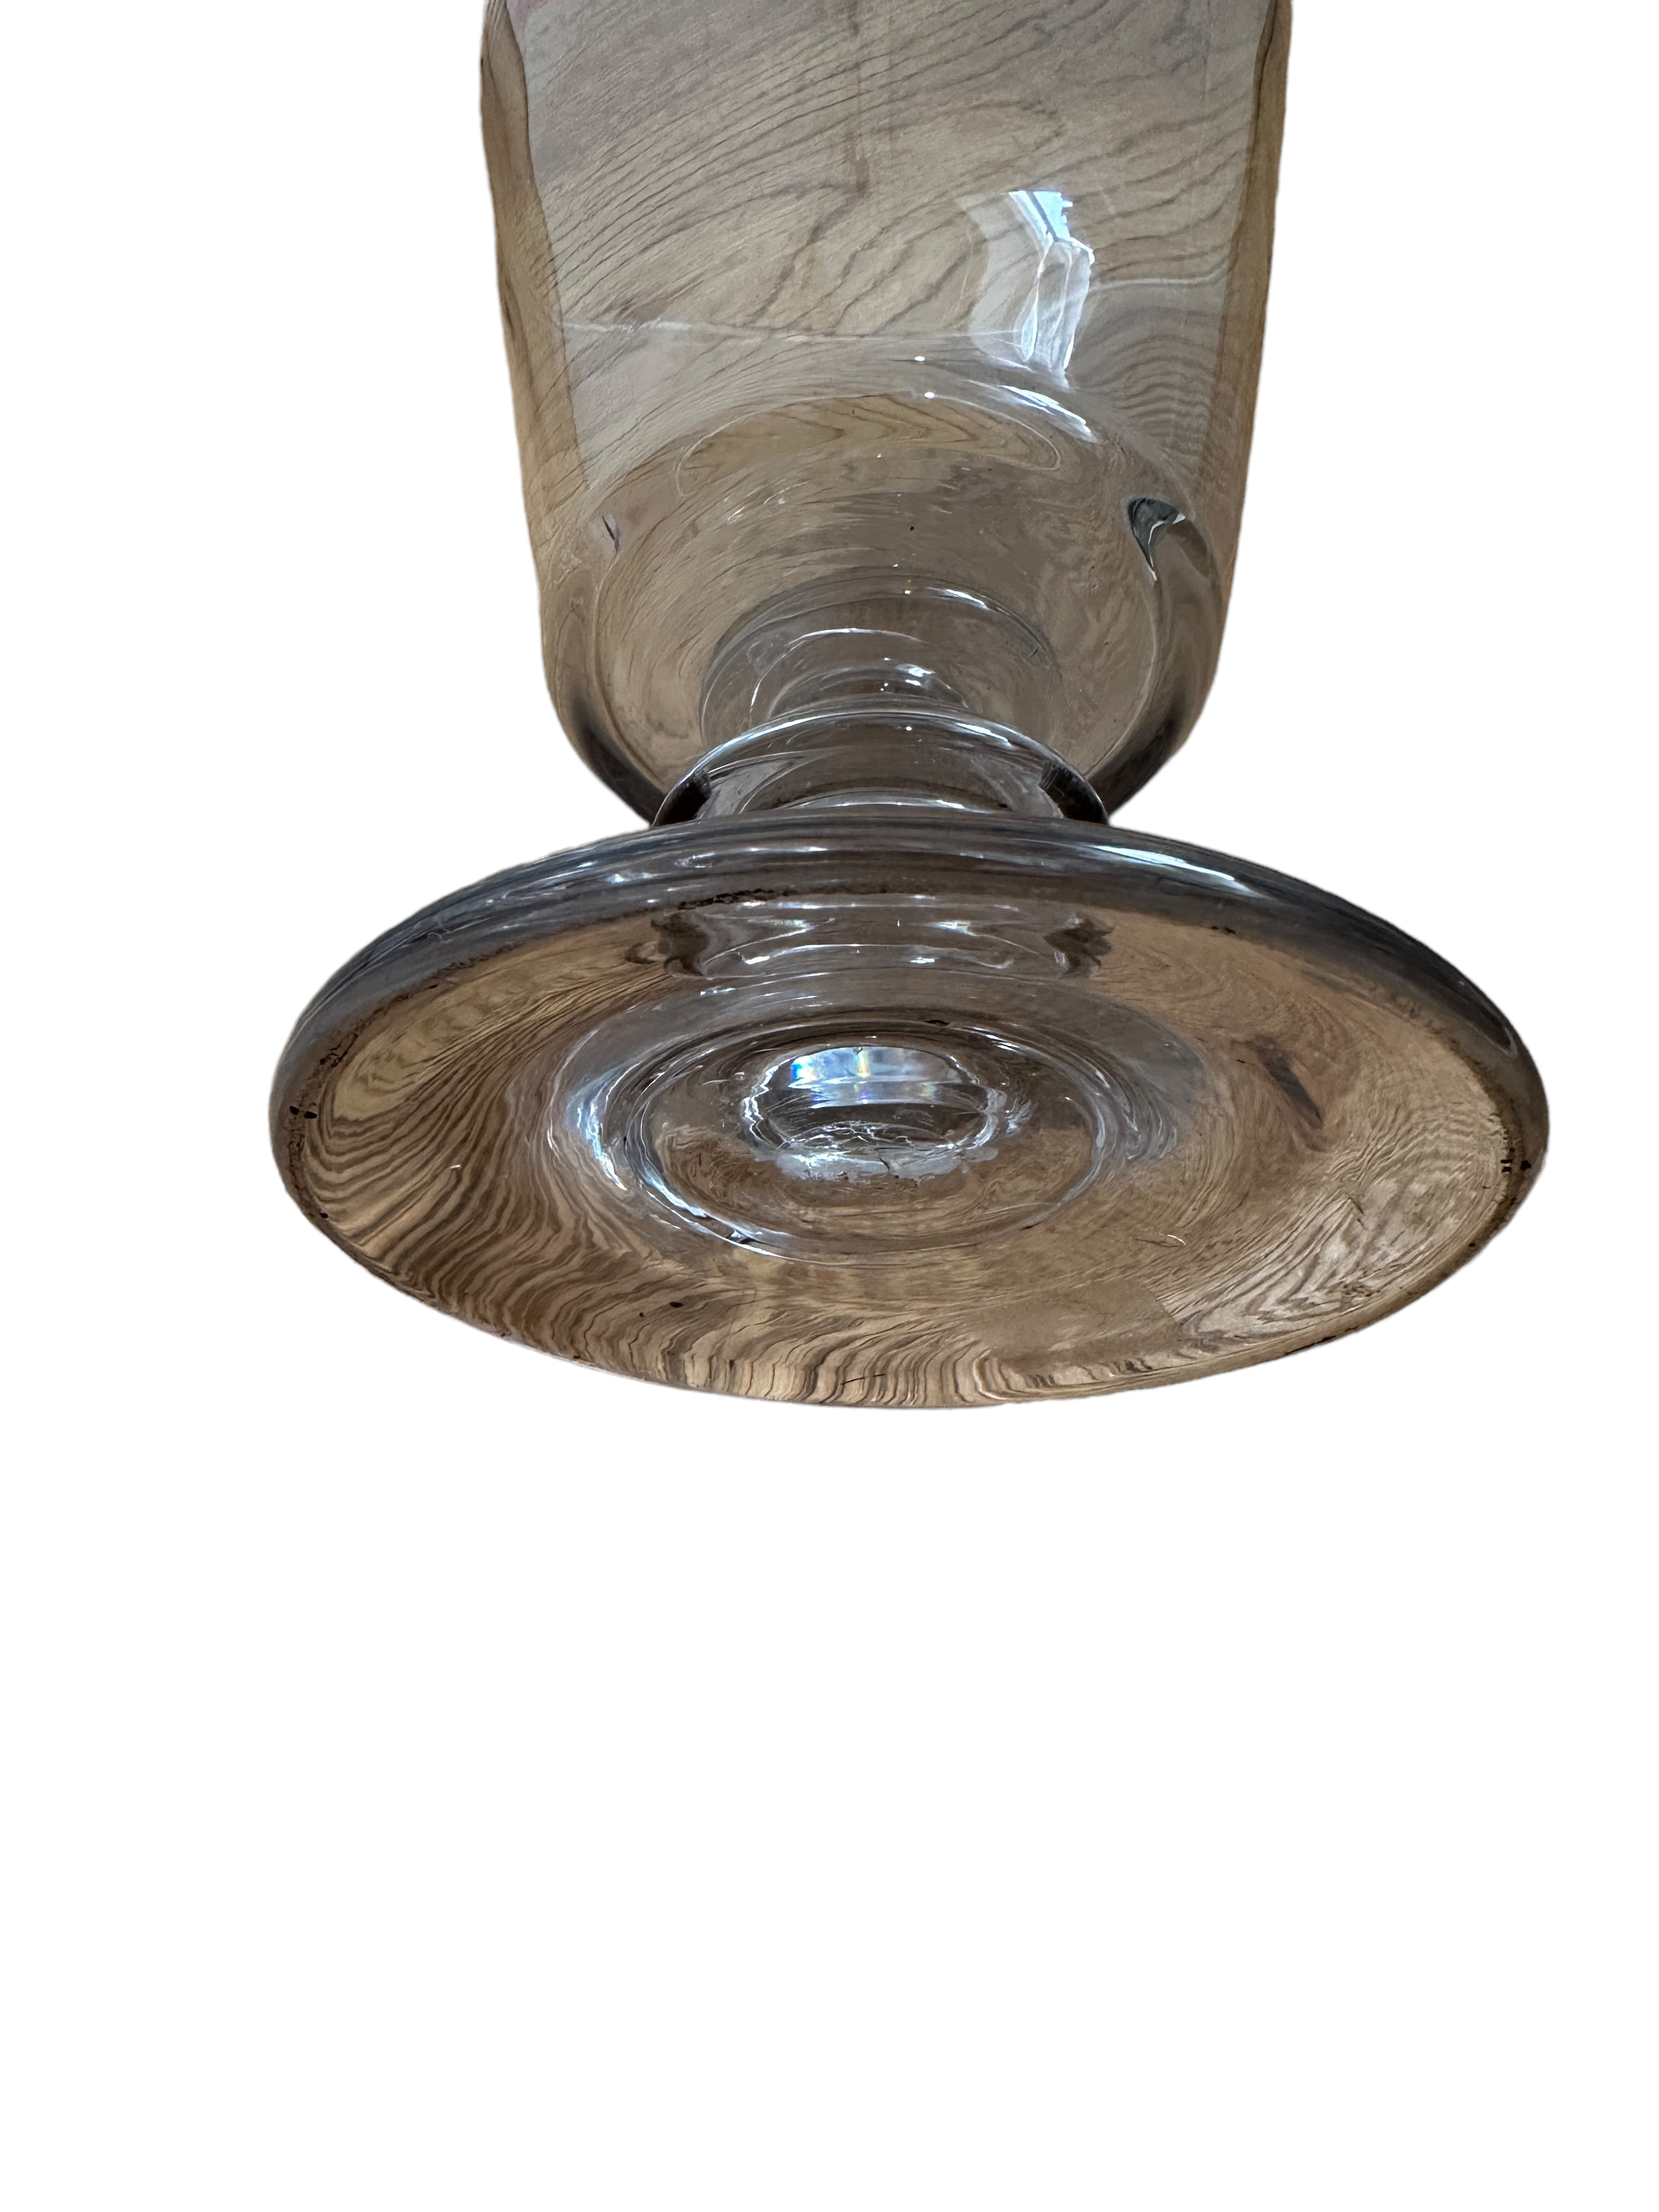 Large Antique Drinking Glass - 8 1/8" tall with top of 5 3/8" diameter and base of 4 3/4" diameter - Image 4 of 4